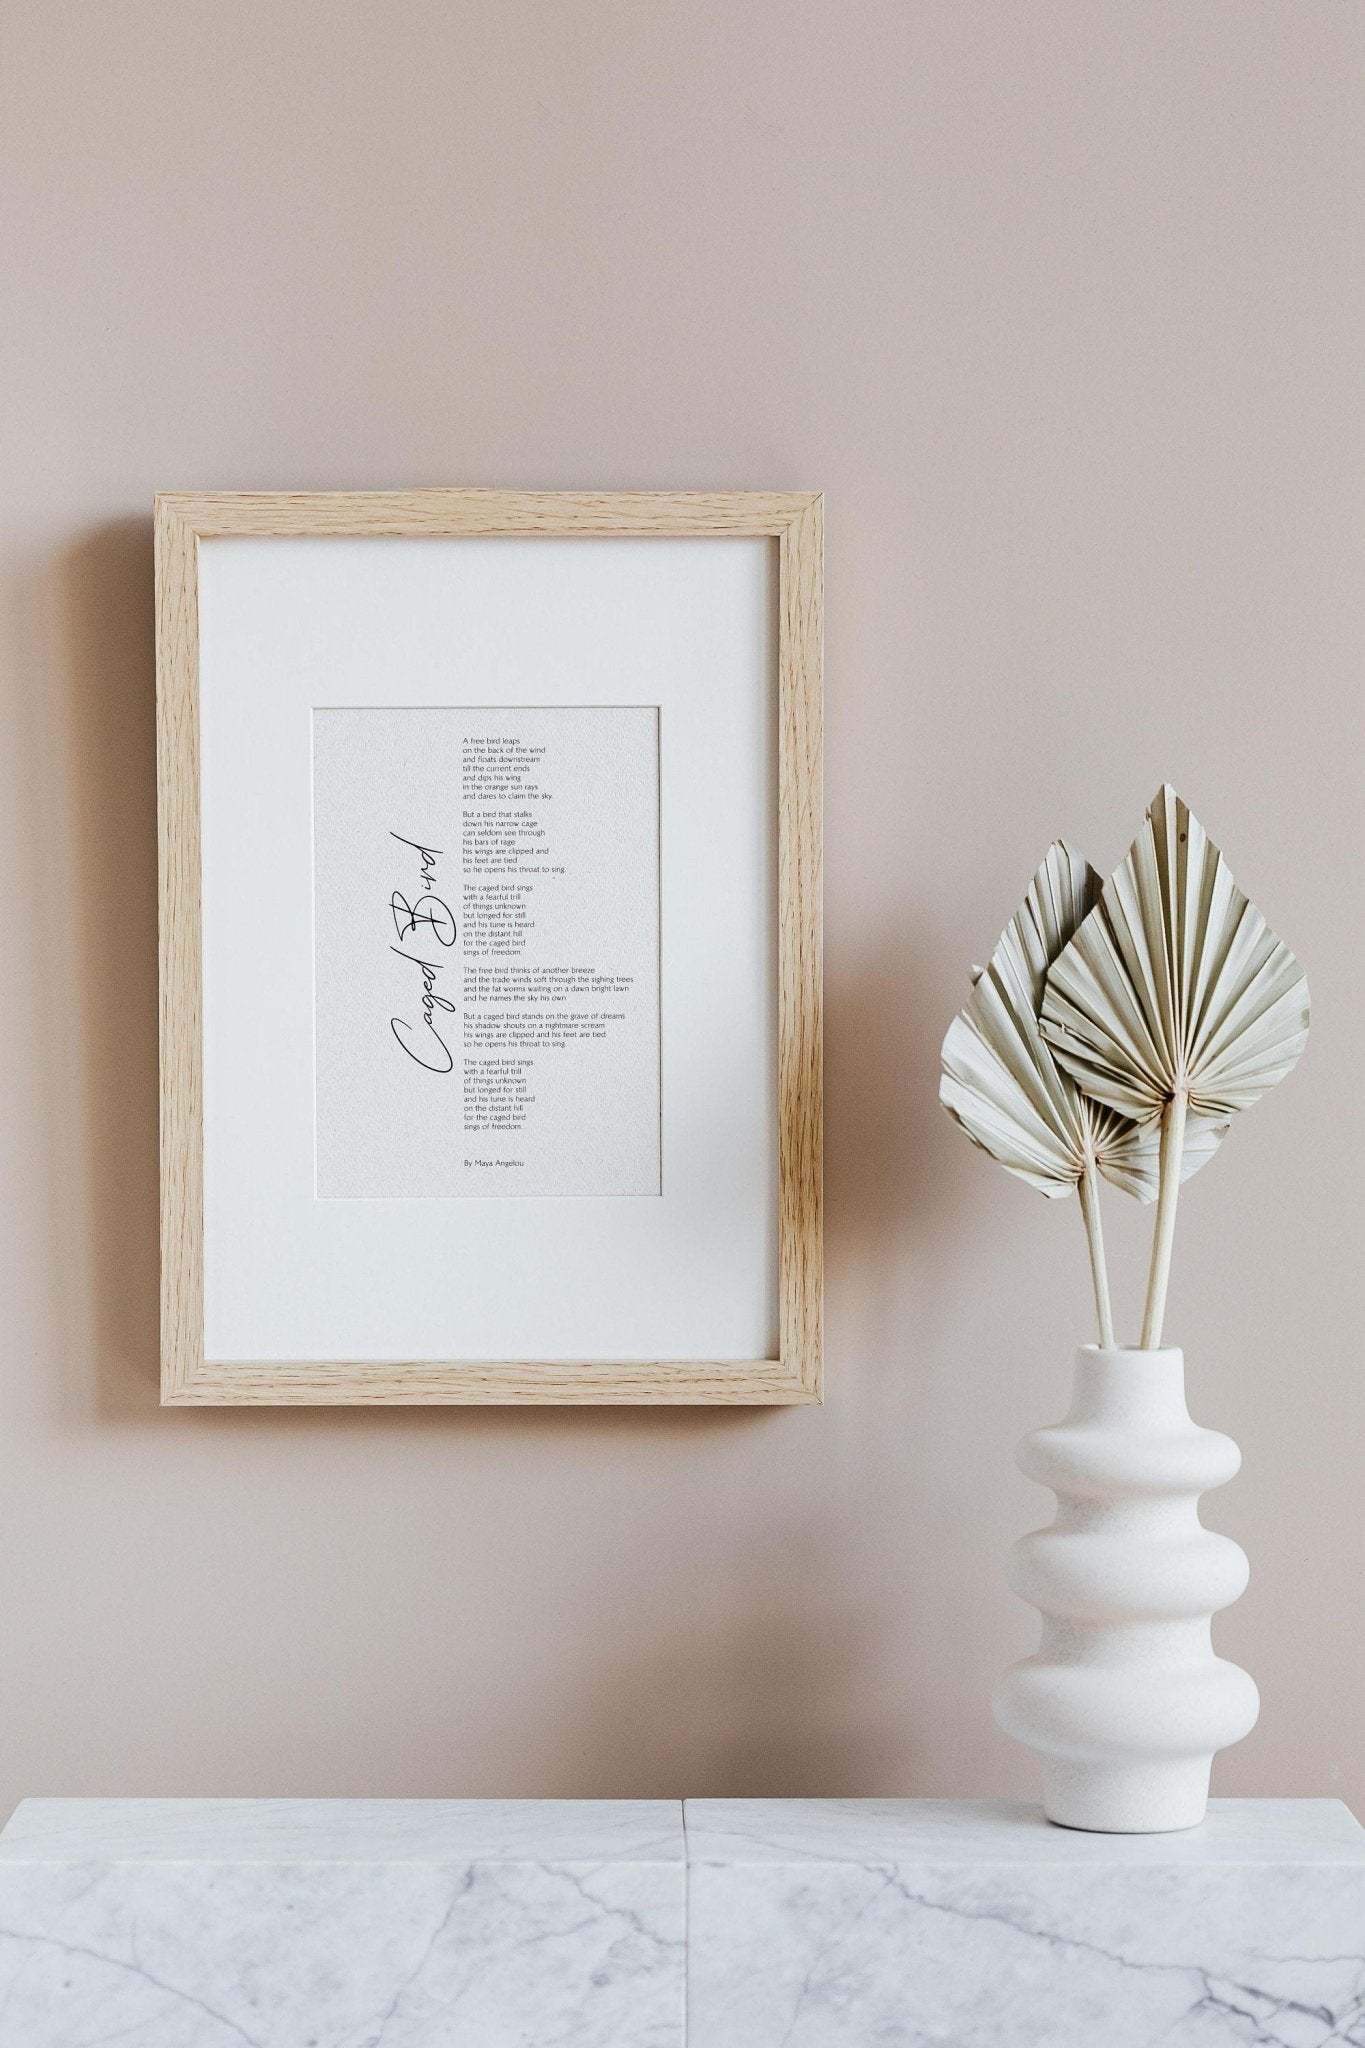 Caged Bird by Maya Angelou Poem Framed - Calligraphy & Typography Print - Maya Angelou Print - I know why the caged birds sings Poster - thepenmansden